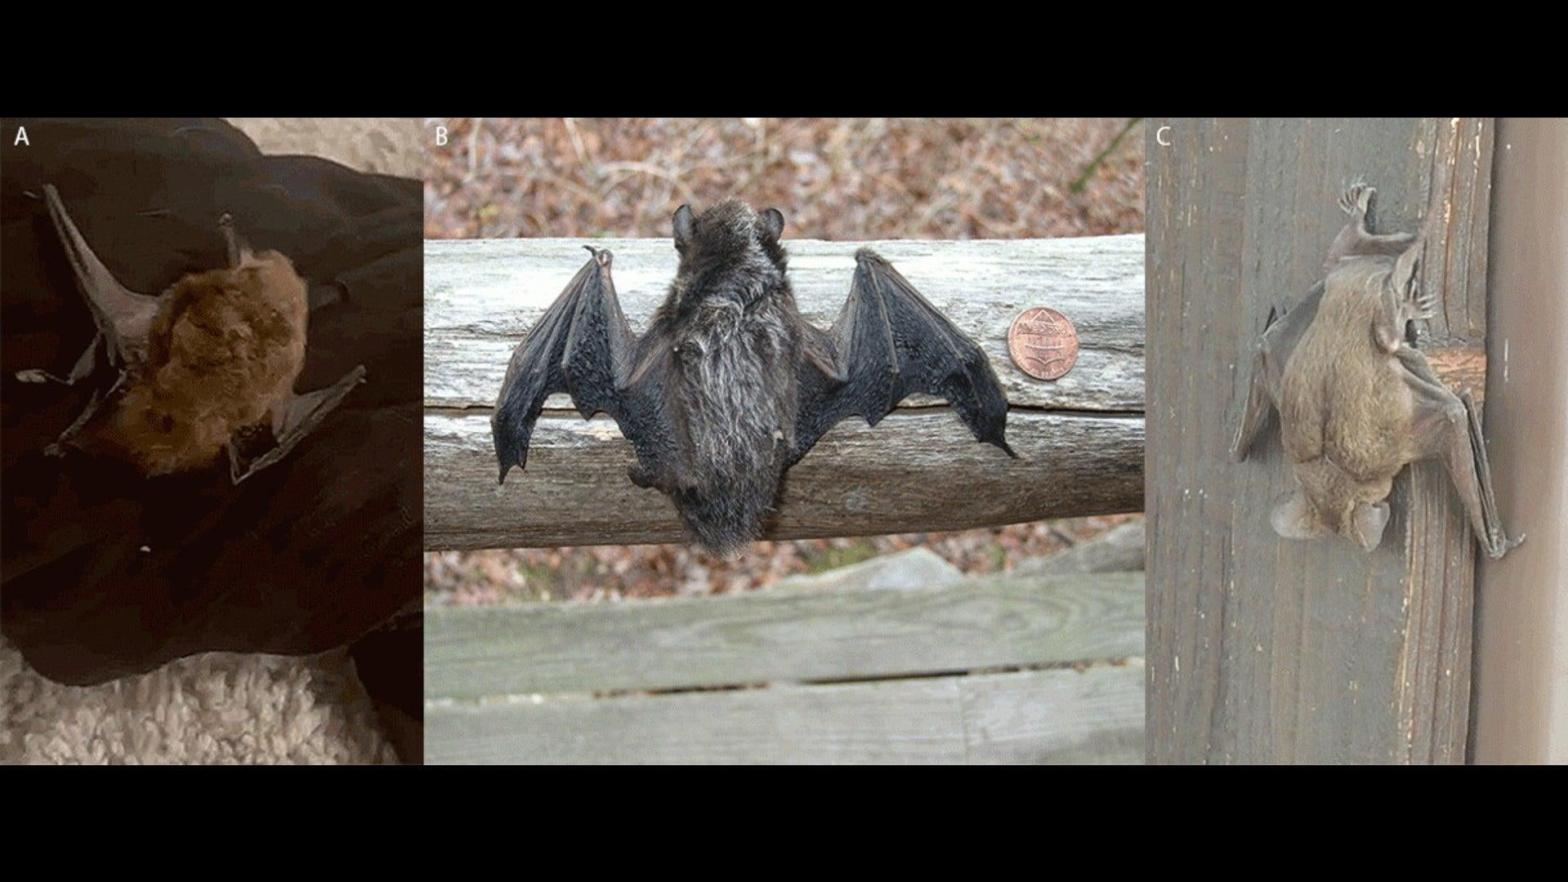 Three bat species A) Eptesicus fuscus (big brown bat), B) Lasionycteris noctivagans (silver-haired bat), and C) Tadarida brasiliensis (Mexican free-tailed bat) implicated in three of the U.S. rabies cases reported last year. (Photo: CDC: Photo A/unidentified patient; Photo B/Mark Mayfield; Photo C/Stephen Gergeni)